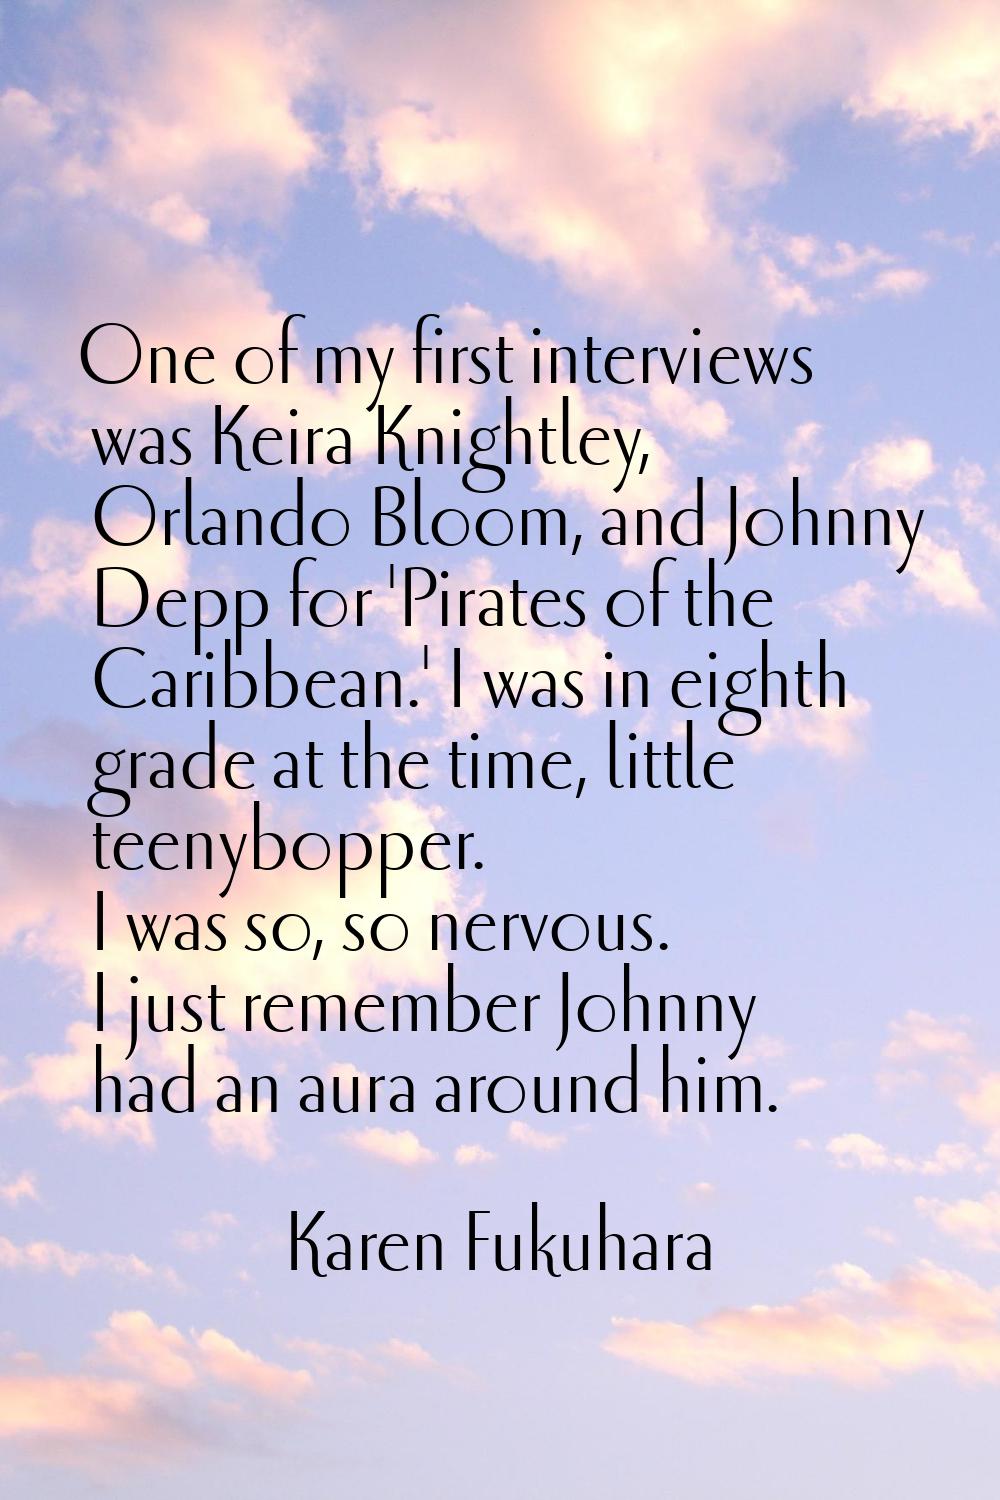 One of my first interviews was Keira Knightley, Orlando Bloom, and Johnny Depp for 'Pirates of the 